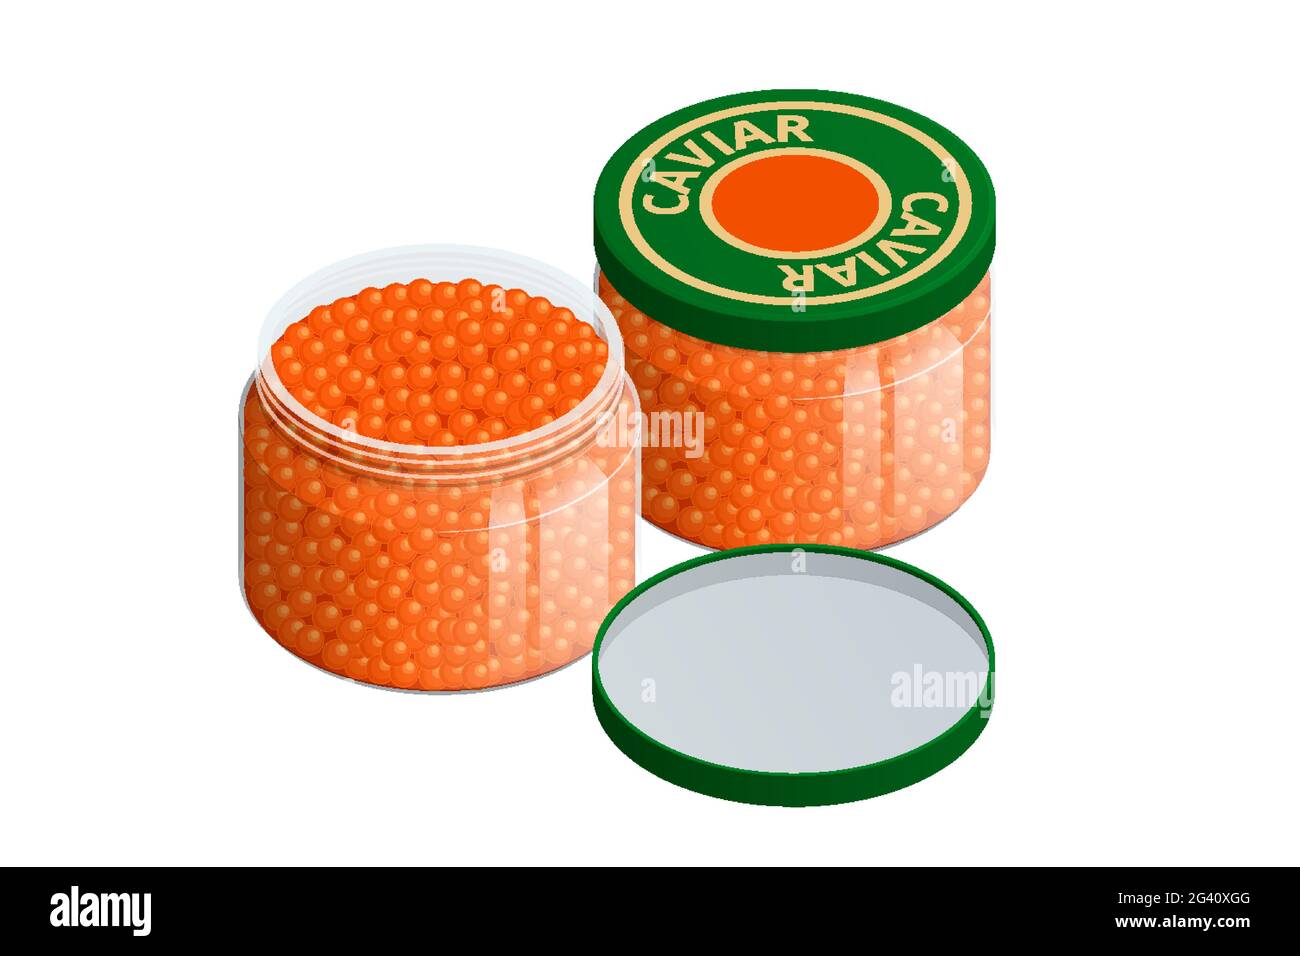 Isometric Salmon Red Caviar. Raw seafood. Luxury delicacy food. Glass jar with red caviar of pink salmon Delicatessen. Gourmet food. Stock Vector